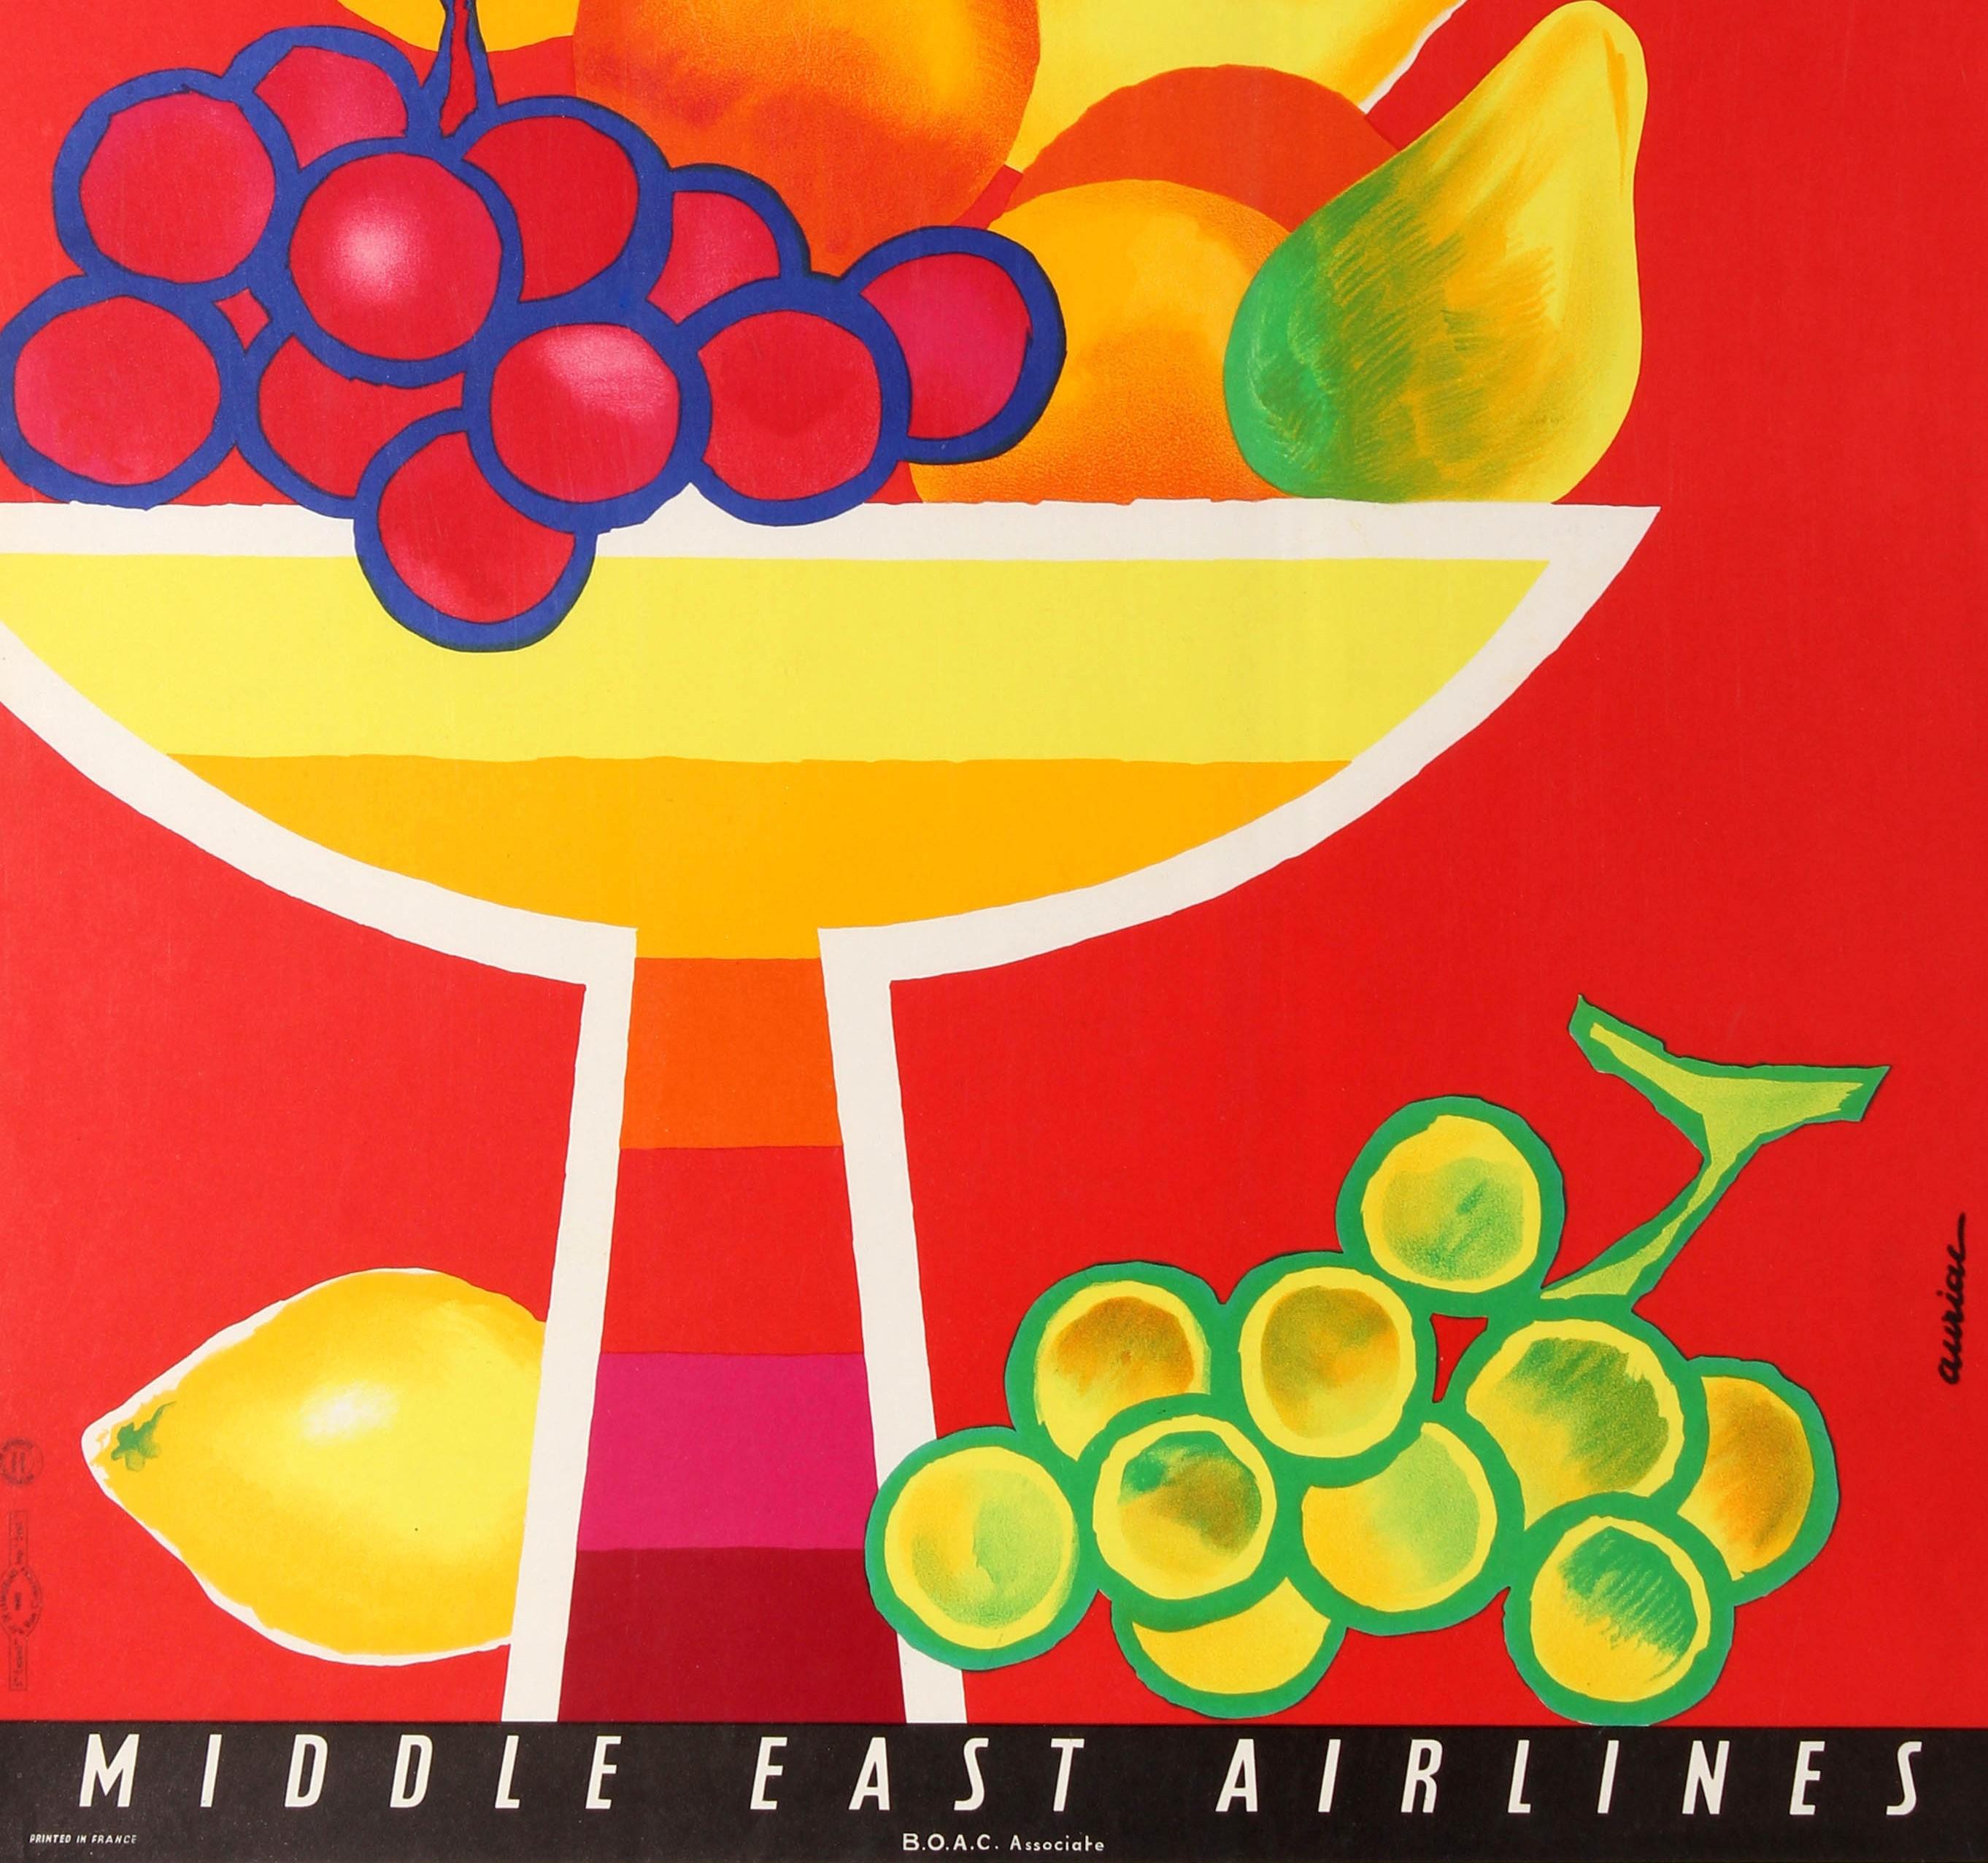 Original Vintage Travel Poster For Libanon Lebanon MEA Middle East Airlines BOAC - Red Print by Jacques Auriac